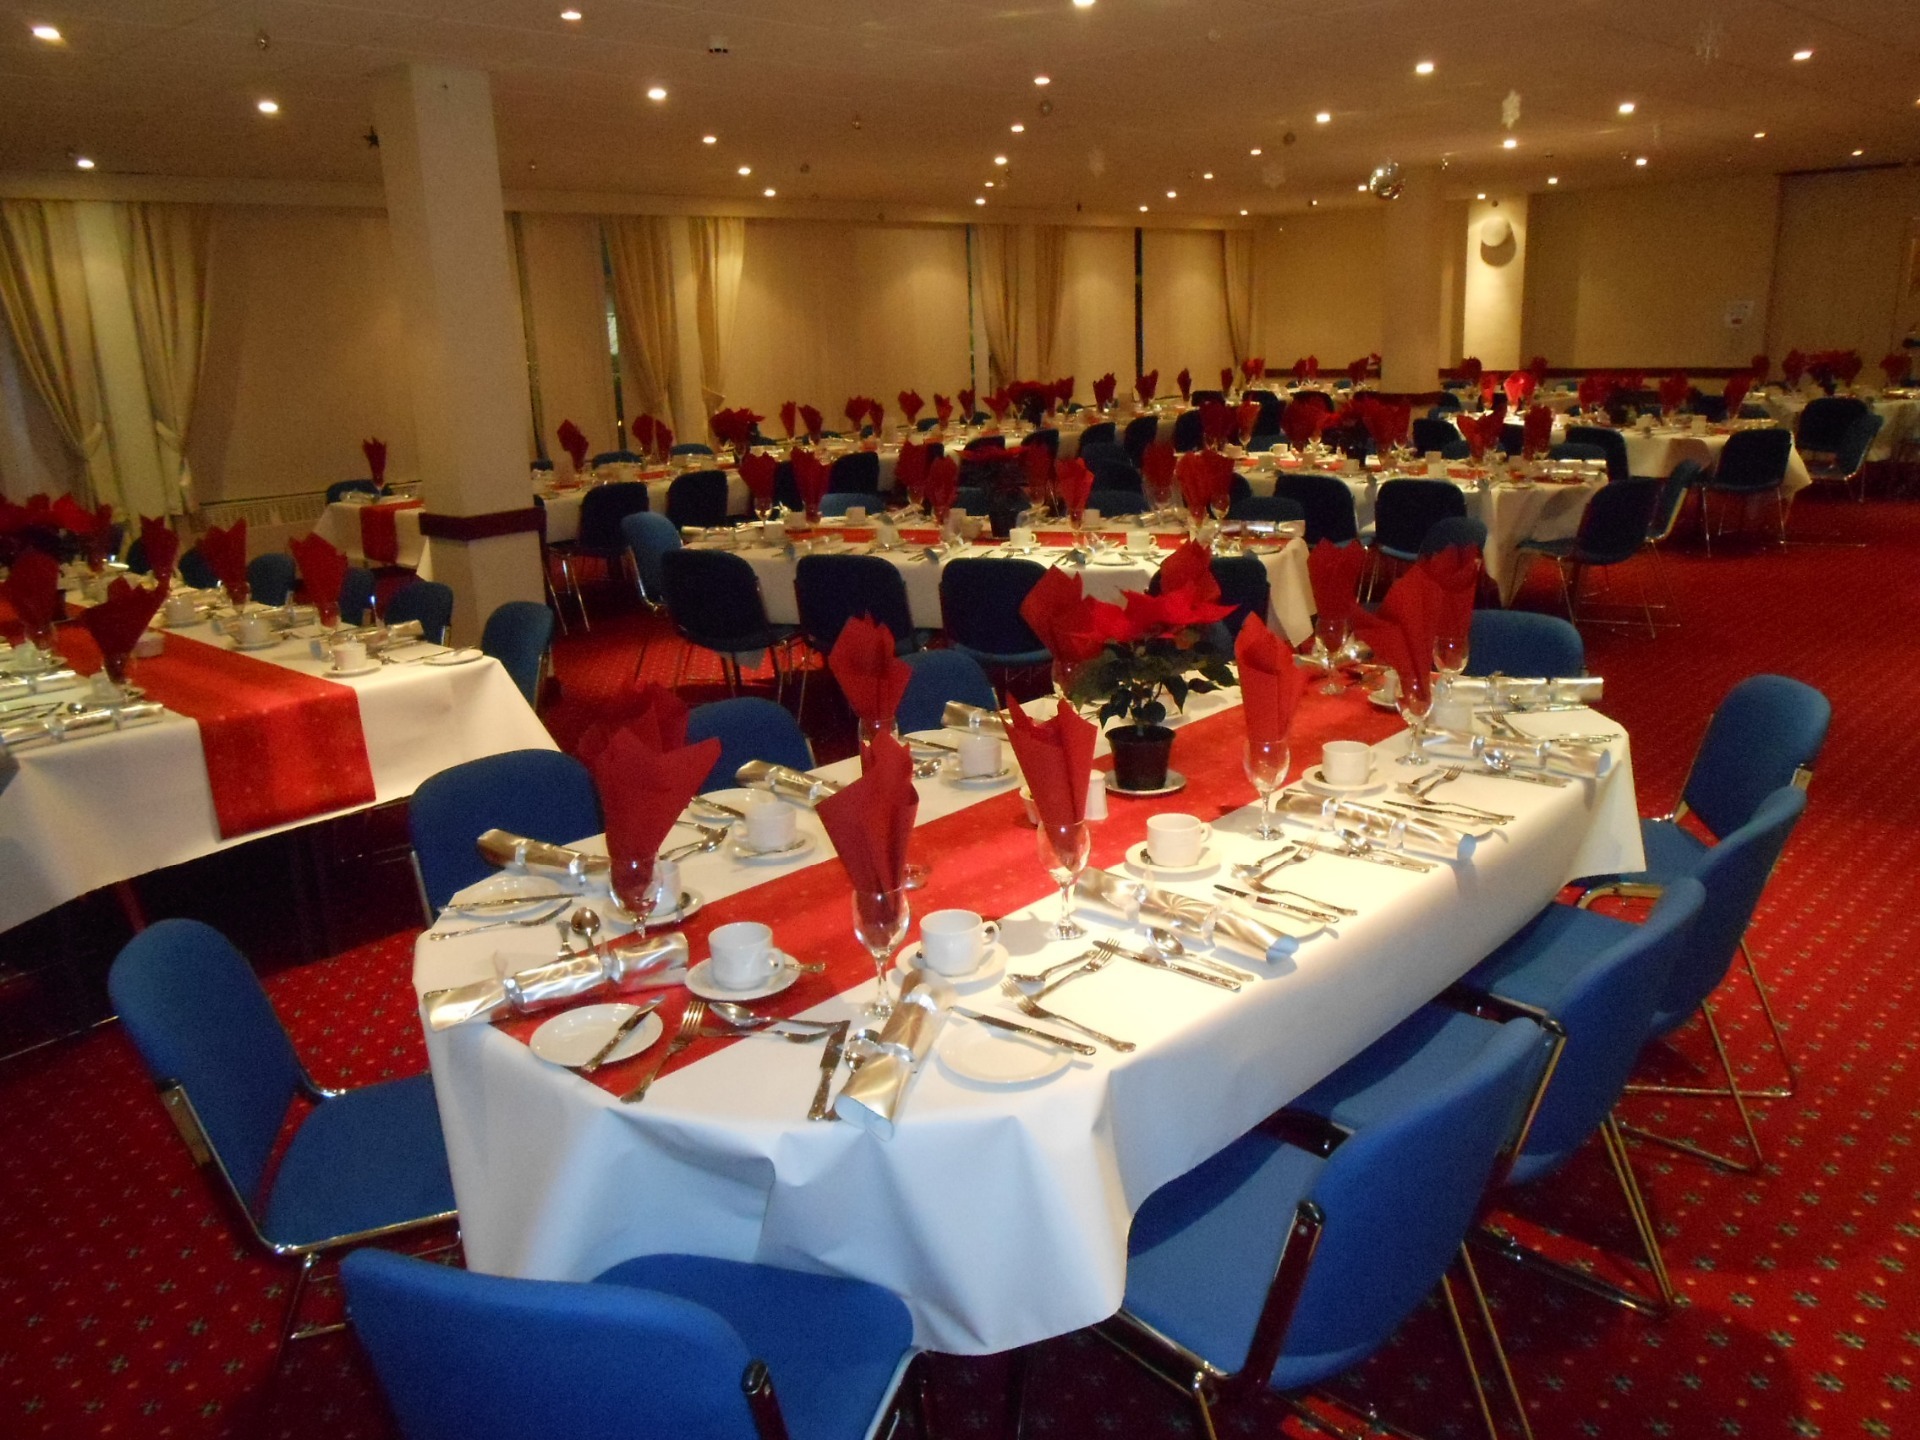 One of the dining room set ups at Imber court